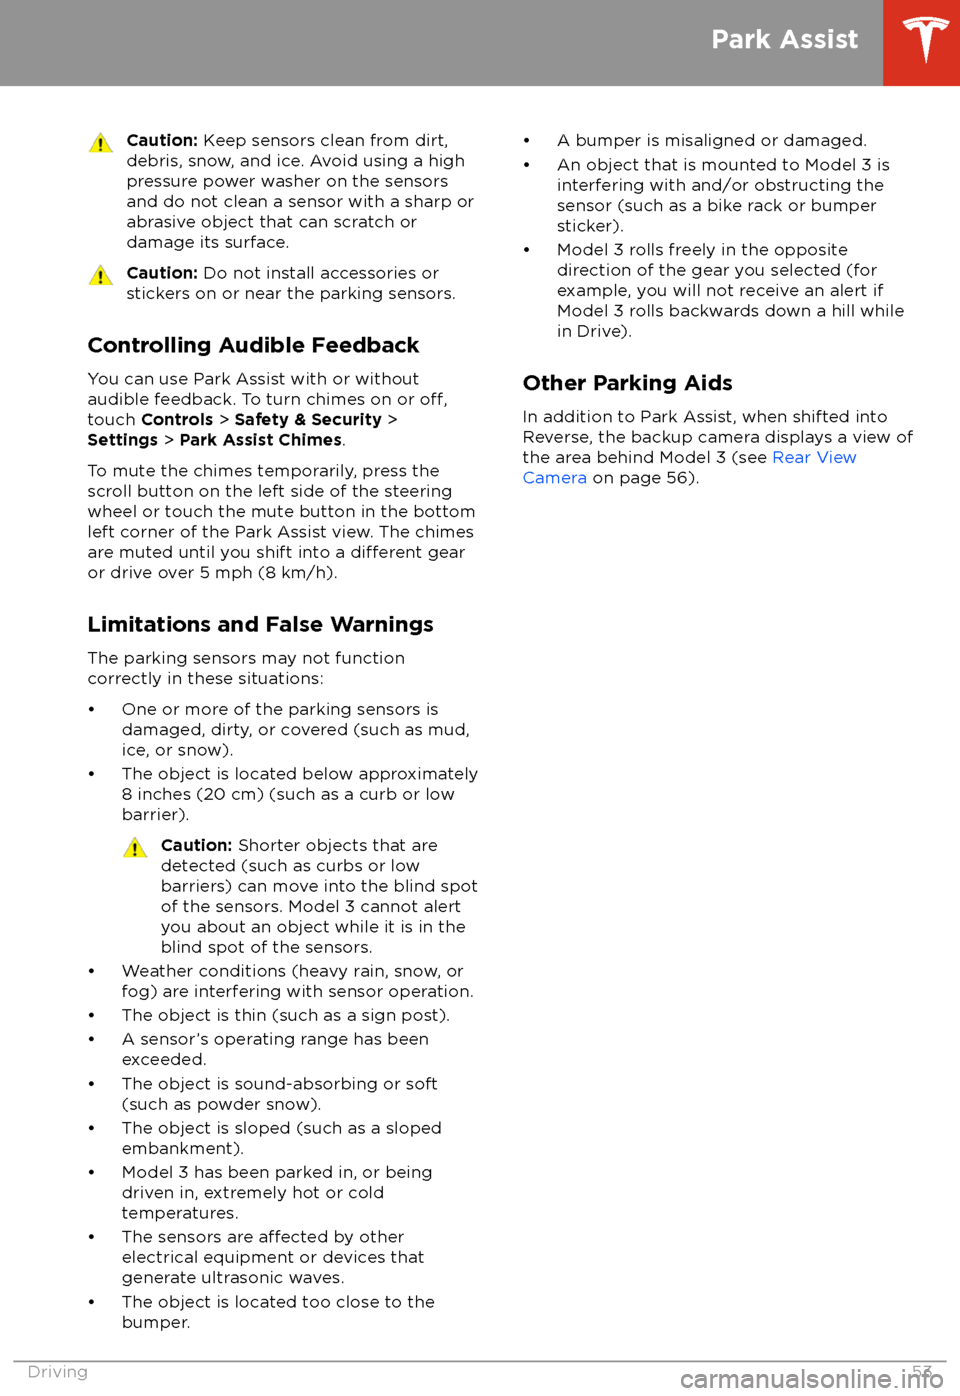 TESLA MODEL 3 2018 Workshop Manual Caution: Keep sensors clean from dirt,
debris, snow, and ice. Avoid using a high
pressure power washer on the sensors
and do not clean a sensor with a sharp or abrasive object that can scratch or
dama